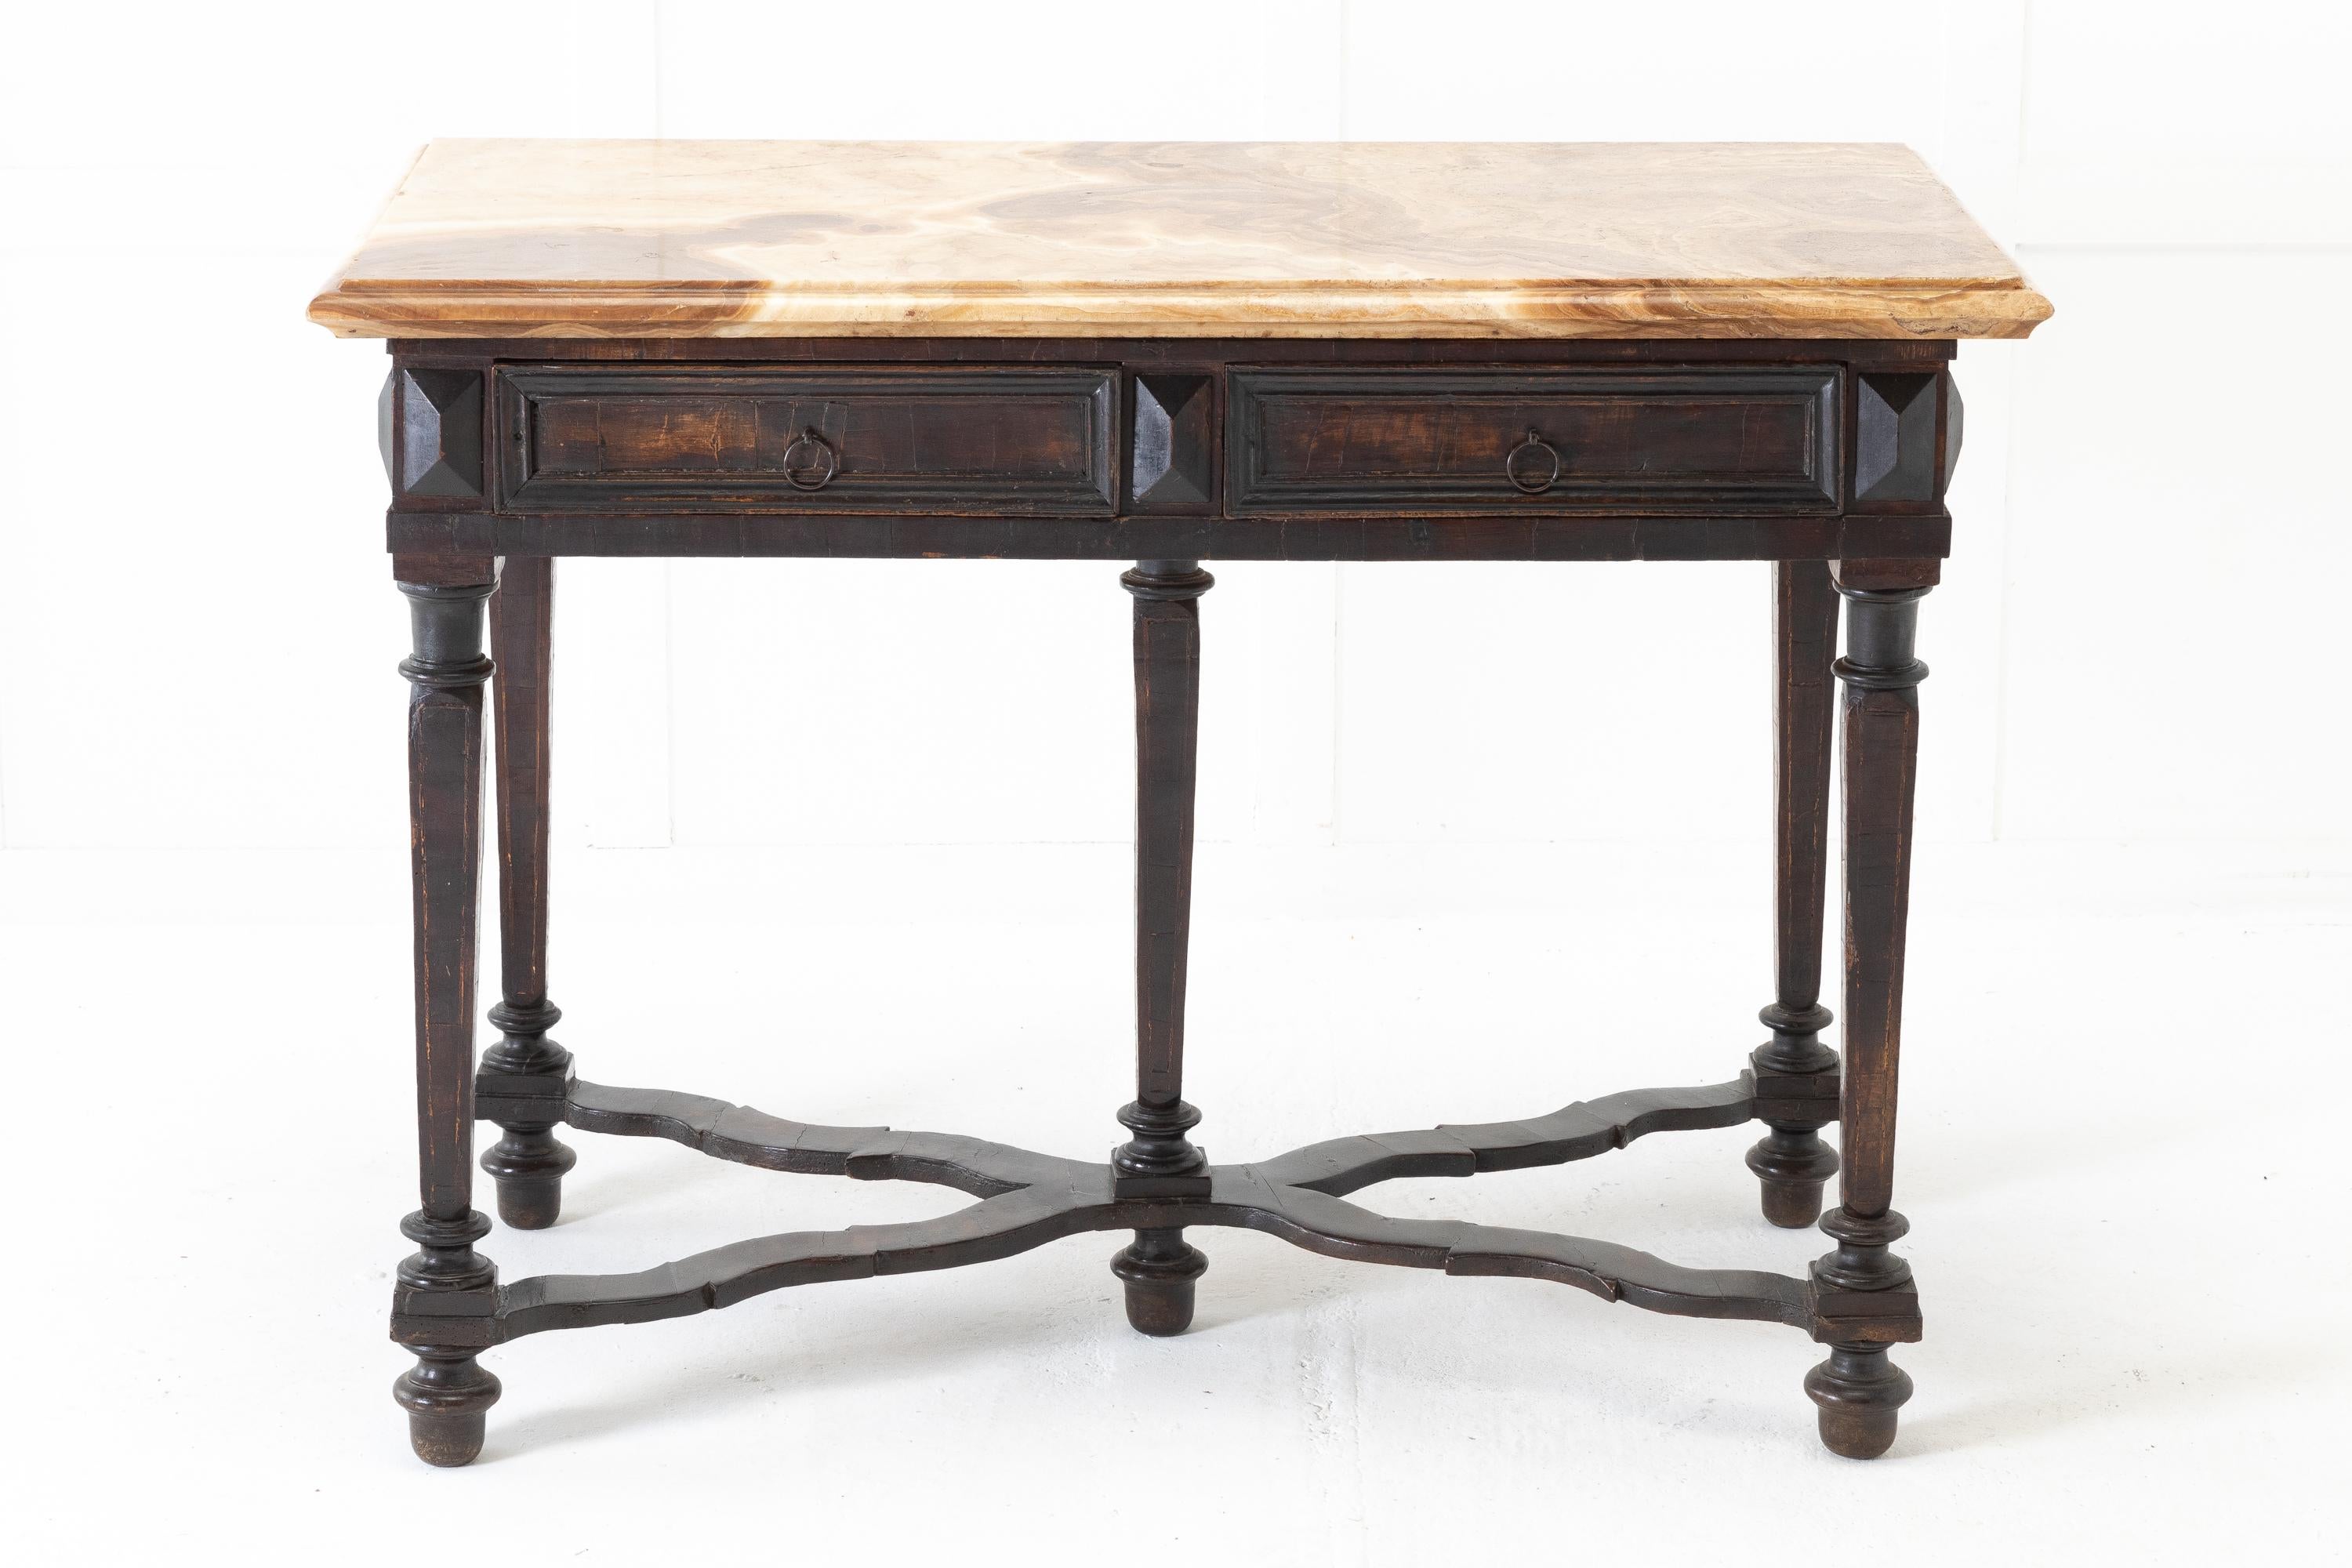 17th Century Italian walnut side table with stunning, solid alabastro fiorito top. Having two moulded panel frieze drawers with ring pull handles on one side. Supported by square, slightly tapering and turned legs, joined by a carved cross stretcher